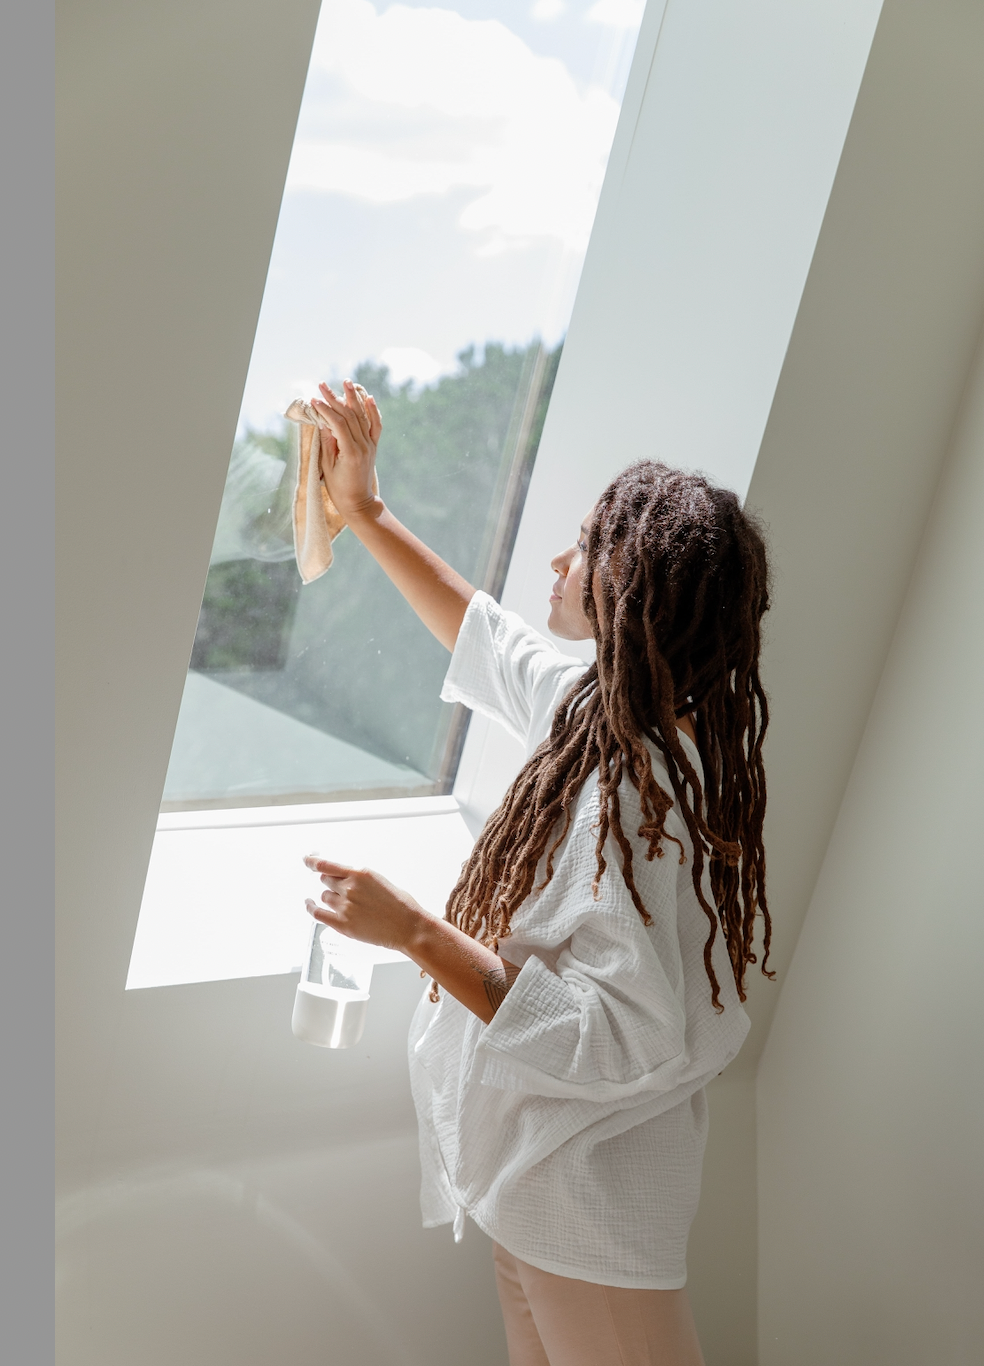 The Perils Of Ammonia-Based Cleaners On Window Tint: Opt For Ammonia-Free  Alternatives